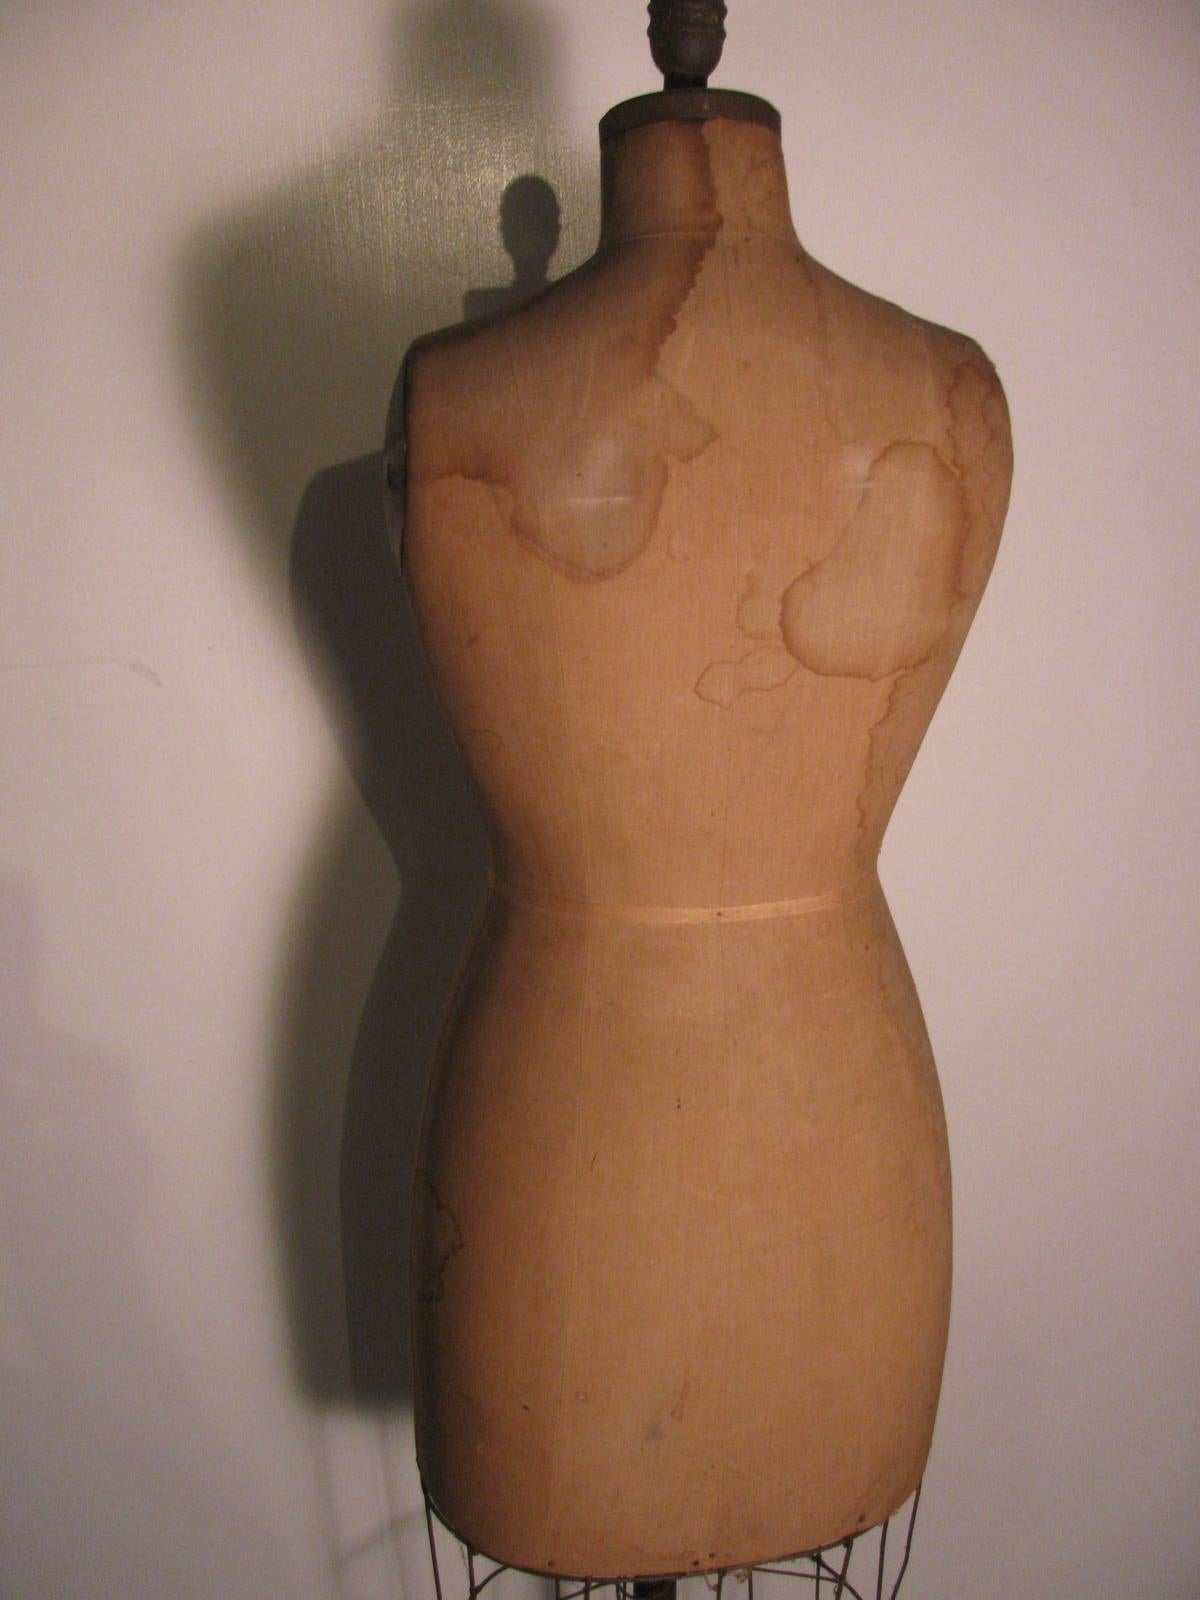 Late 19th Century Dress Form Mannequin In Good Condition For Sale In Port Jervis, NY